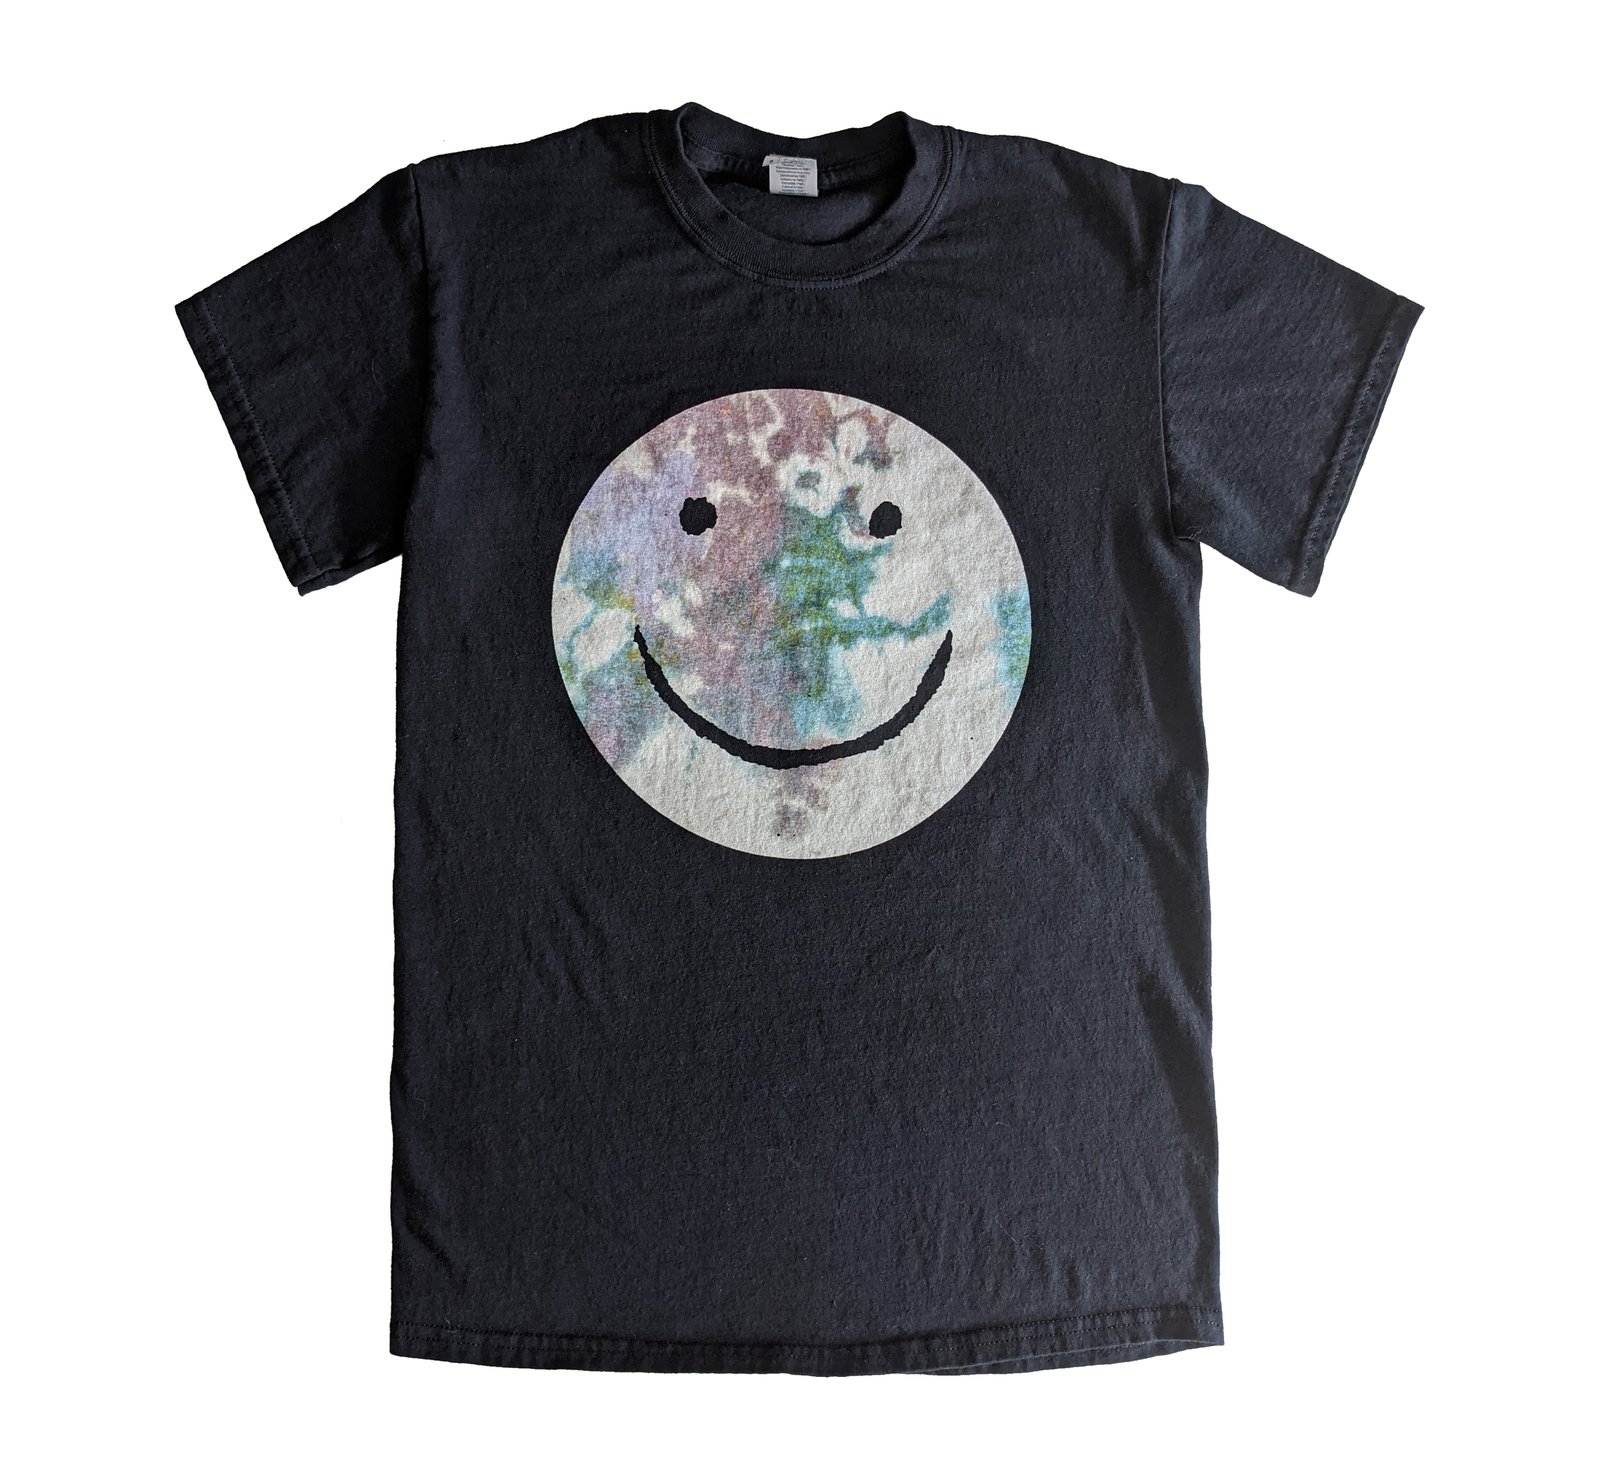 HⒶPPY Tie-Dyed Black T-Shirt | SORE MIND